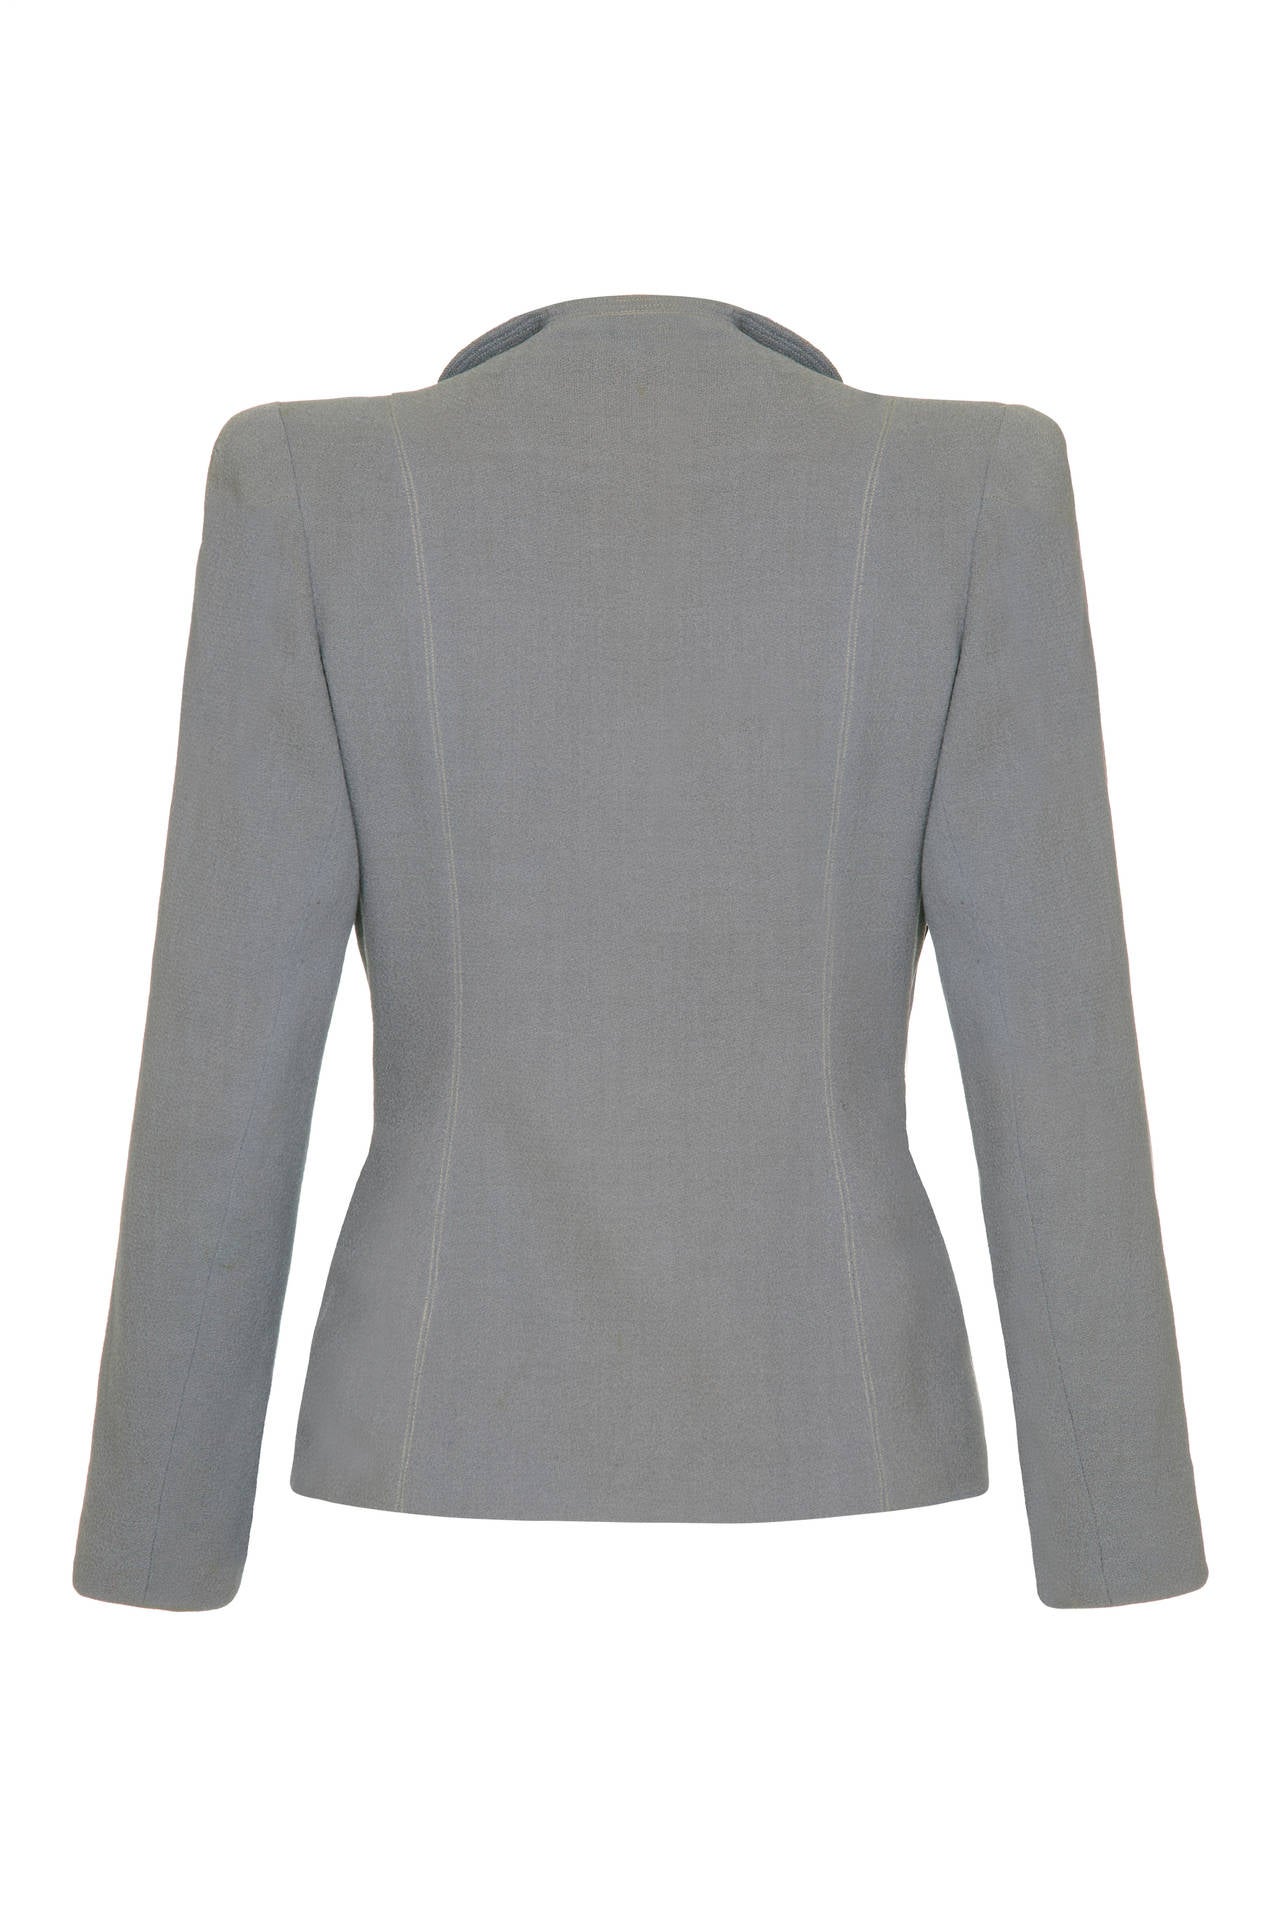 Beautiful soft tailored jacket in dove grey with lovely, classic deco details.  It is fully lined in a coordinating silk lining and features shoulder pads, arrow shaped pockets and topstitching throughout.  It fastens at the waist with a hook and